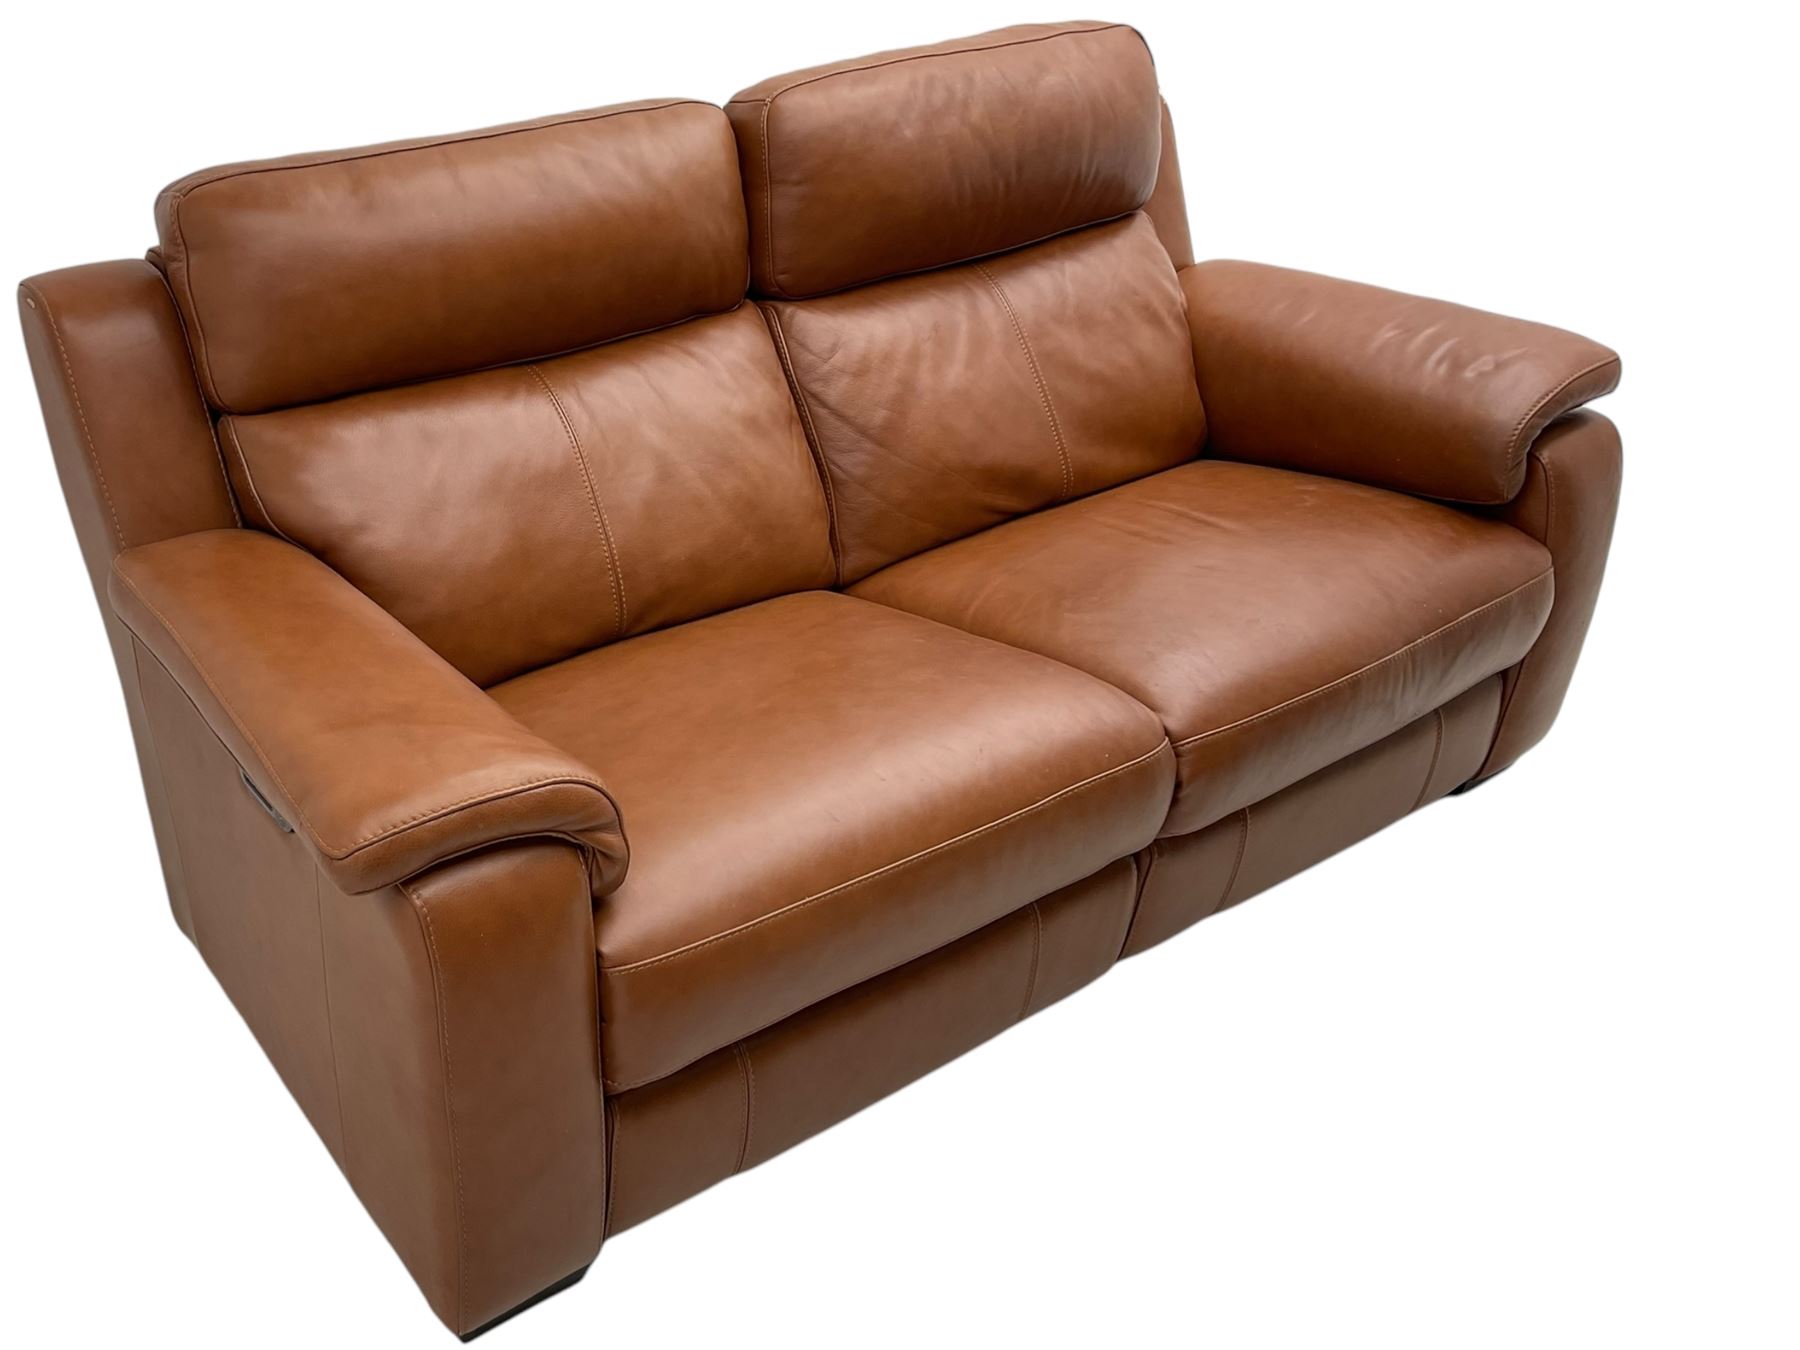 Two-seat electric reclining 'smart' sofa (W192cm - Image 3 of 8